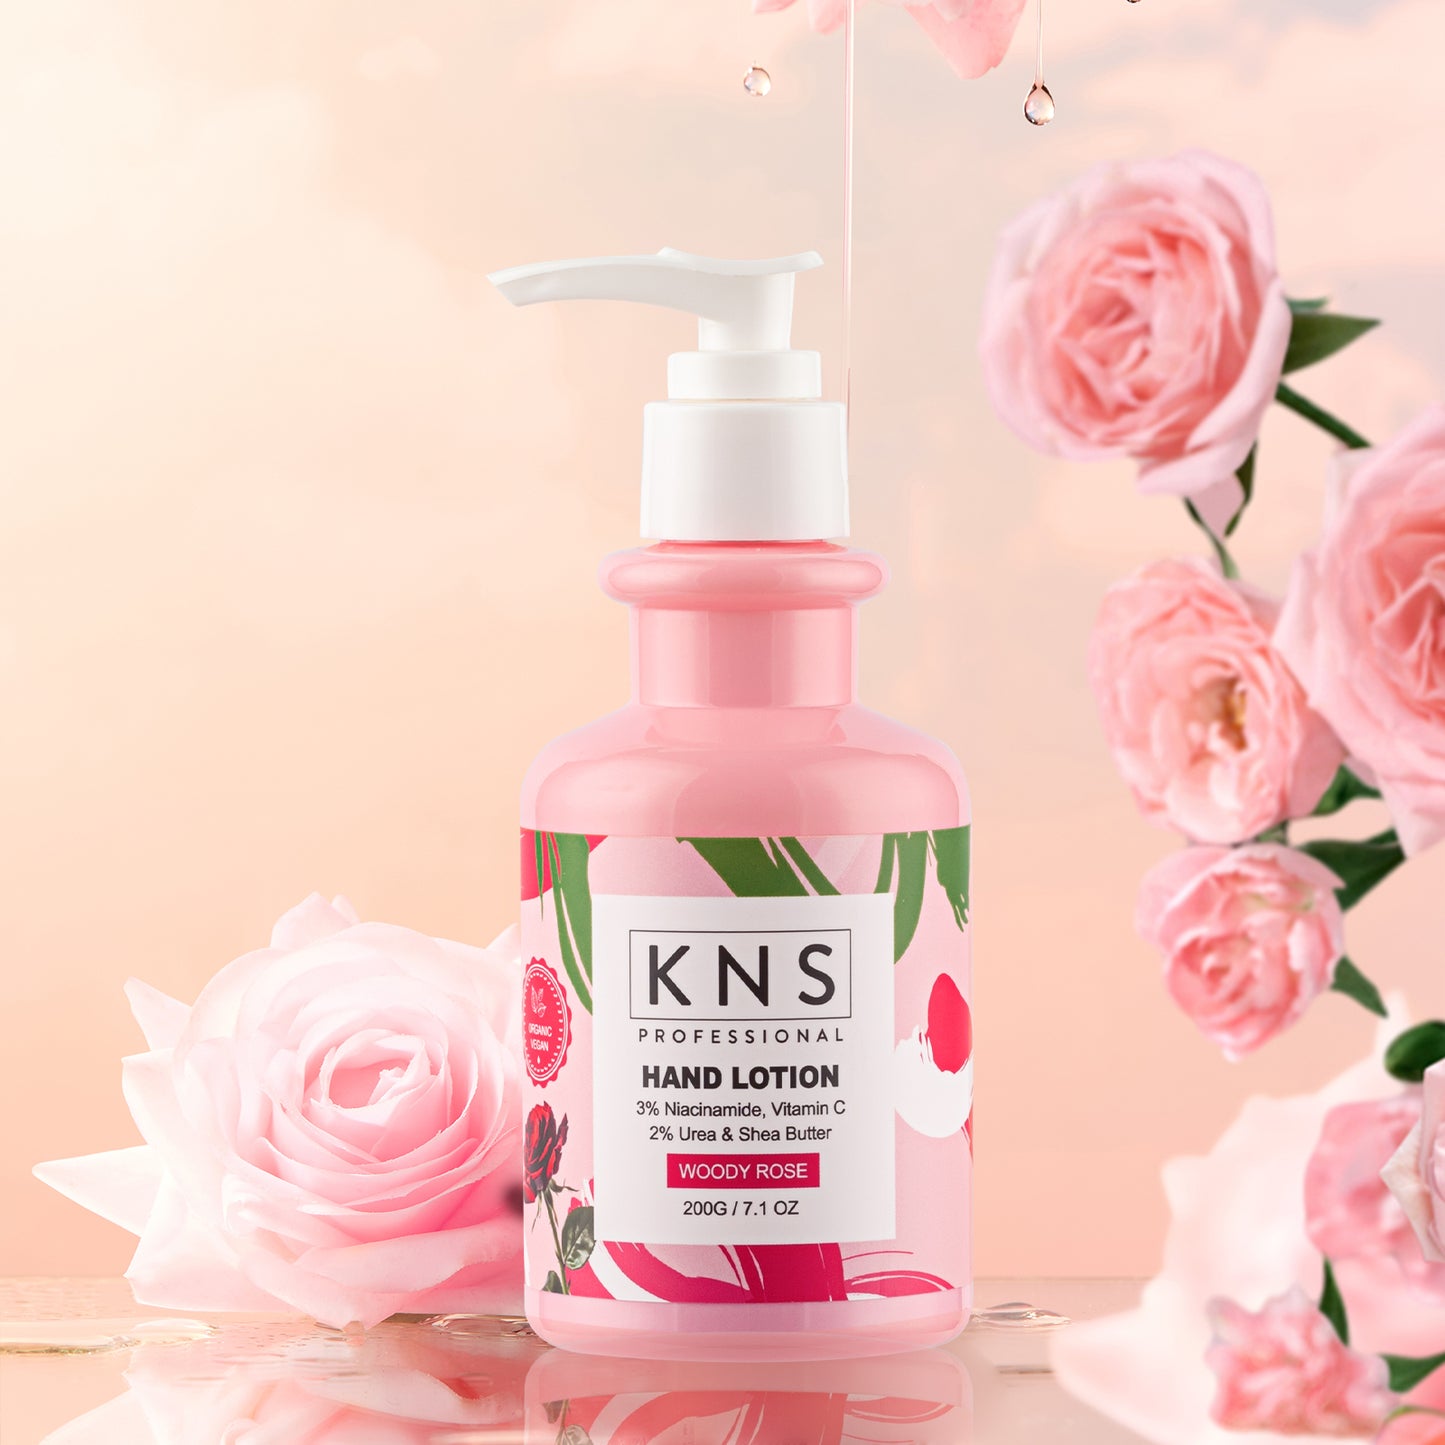 KNS Hand Lotion